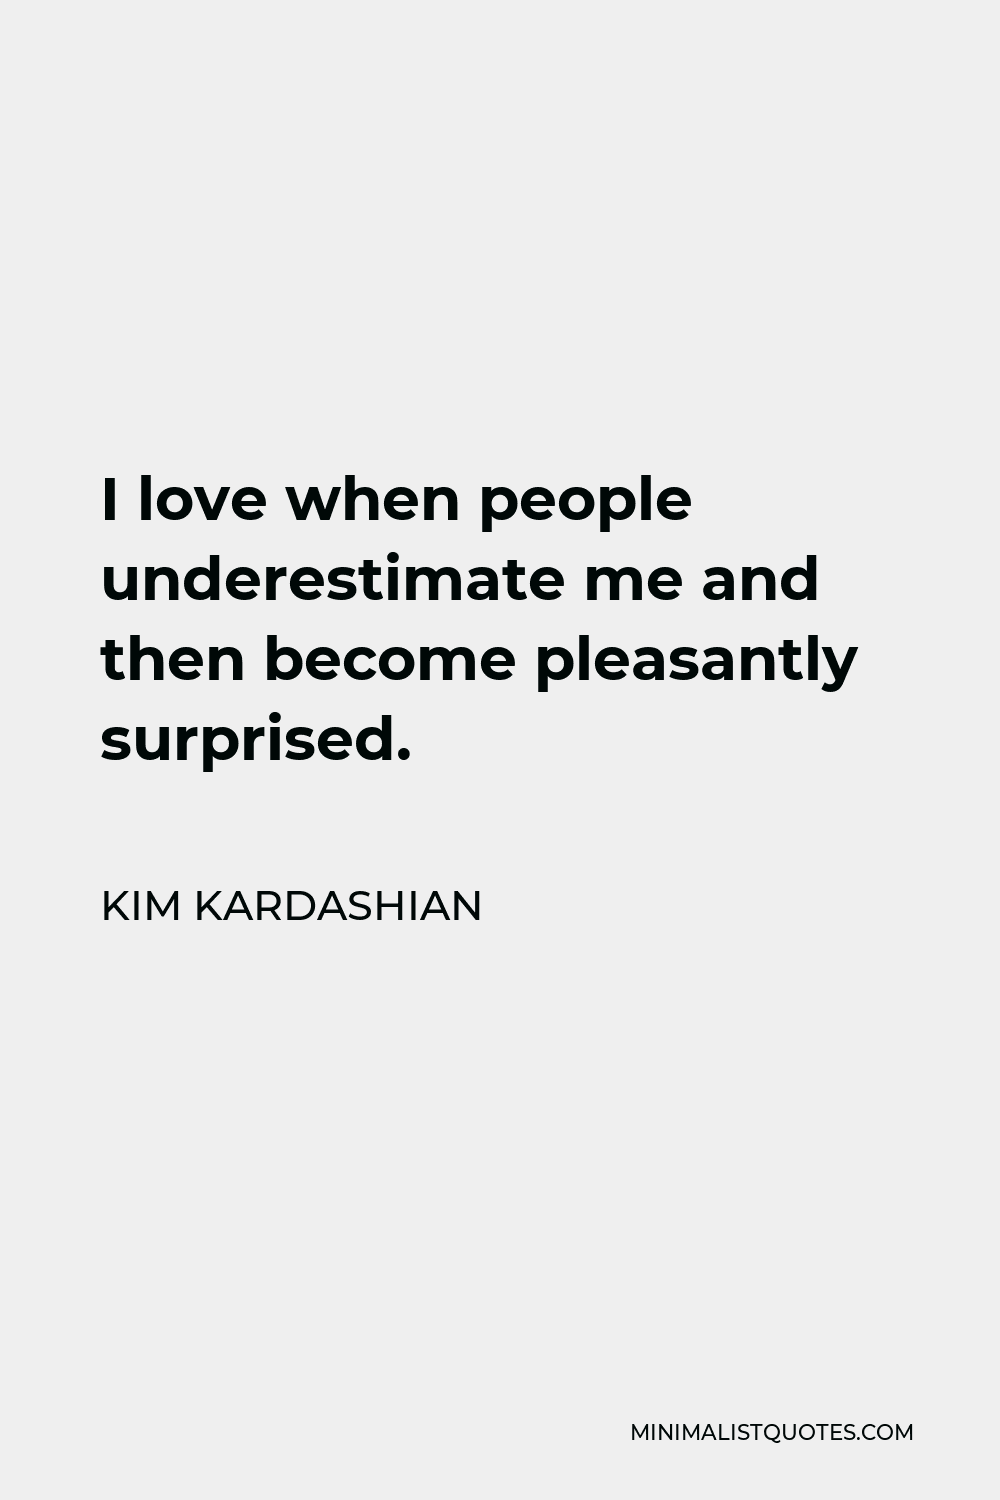 Kim Kardashian Quote - I love when people underestimate me and then become pleasantly surprised.